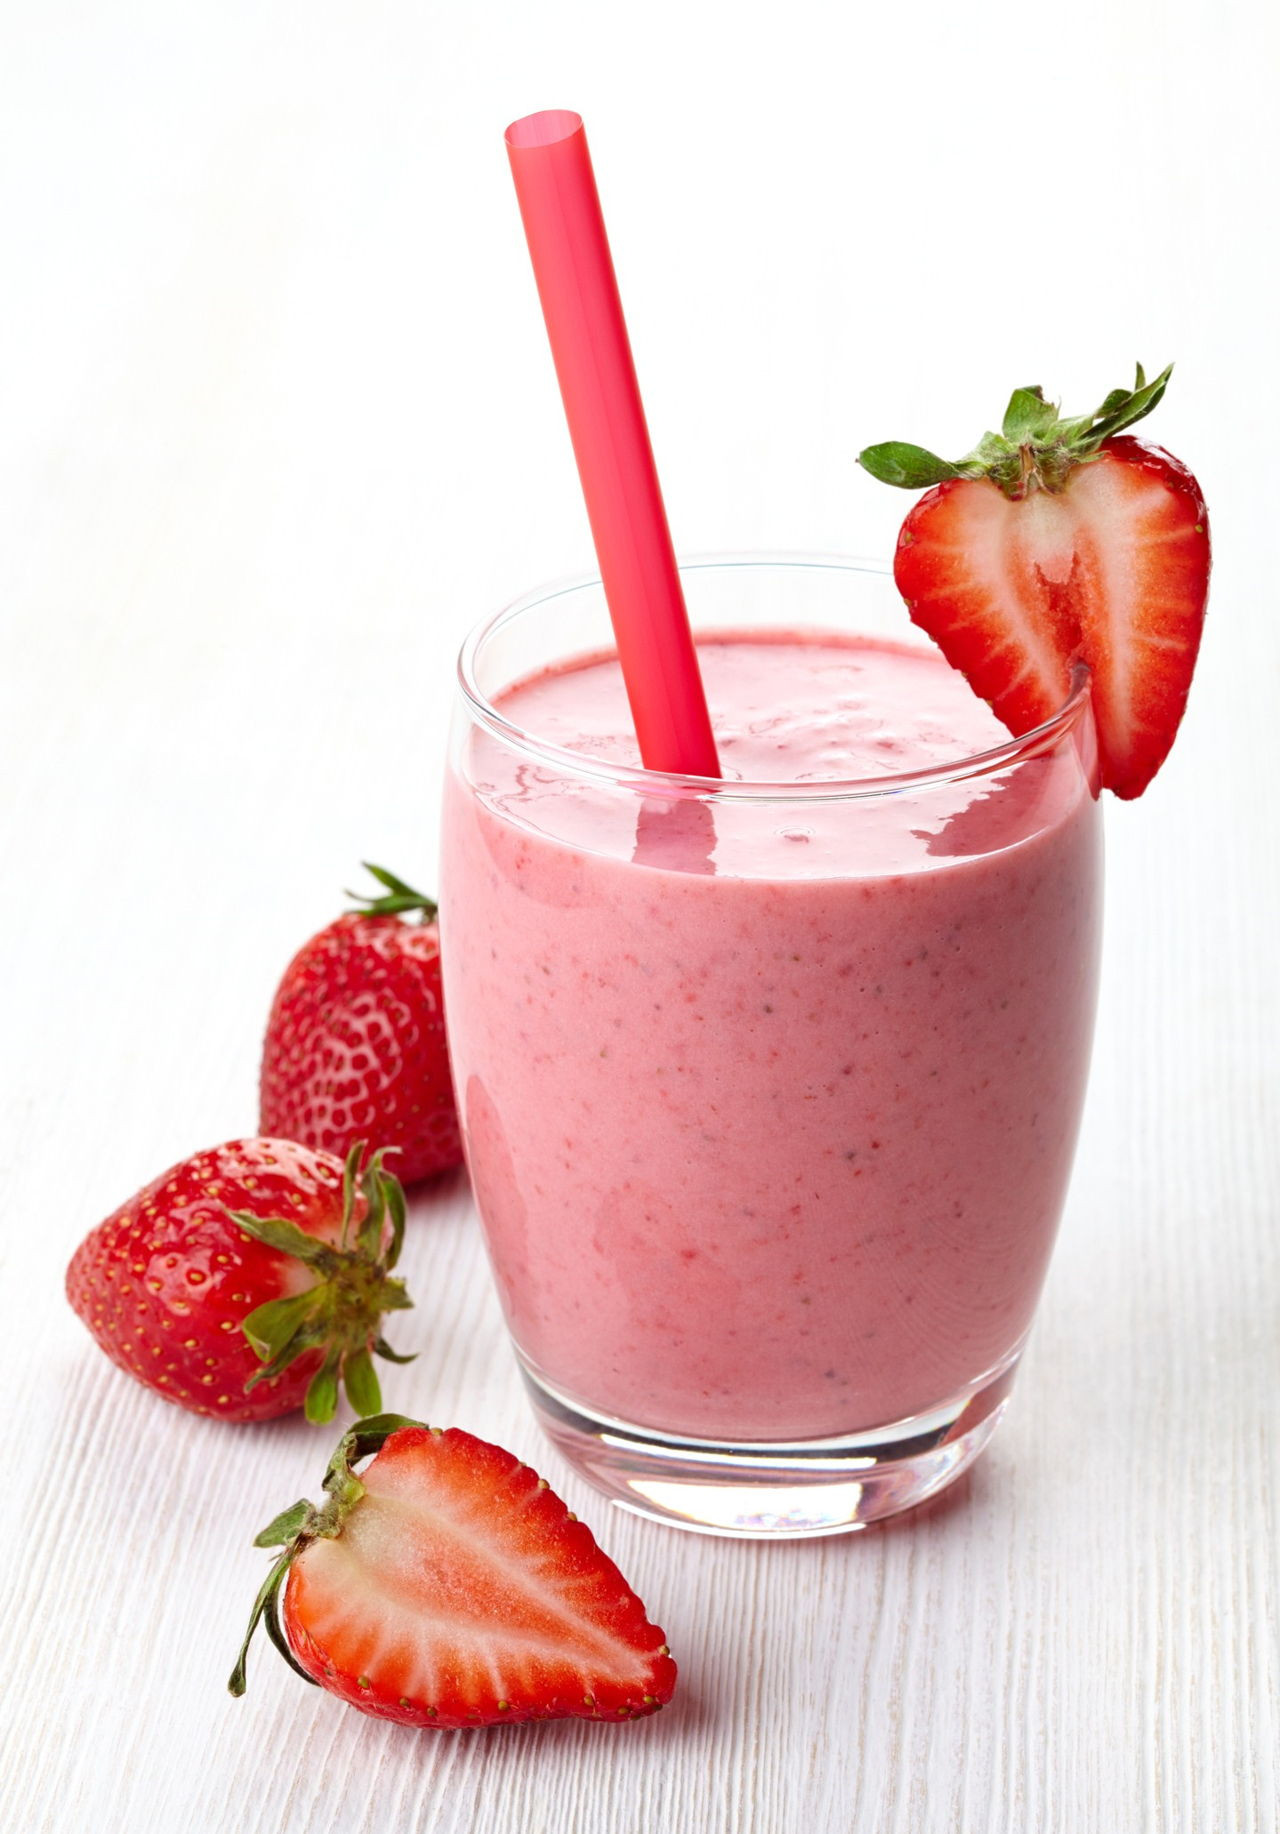 Yogurt Smoothie Recipes
 Yogurt Smoothie Recipes to Make You Feel Fresh and Rejuvenated